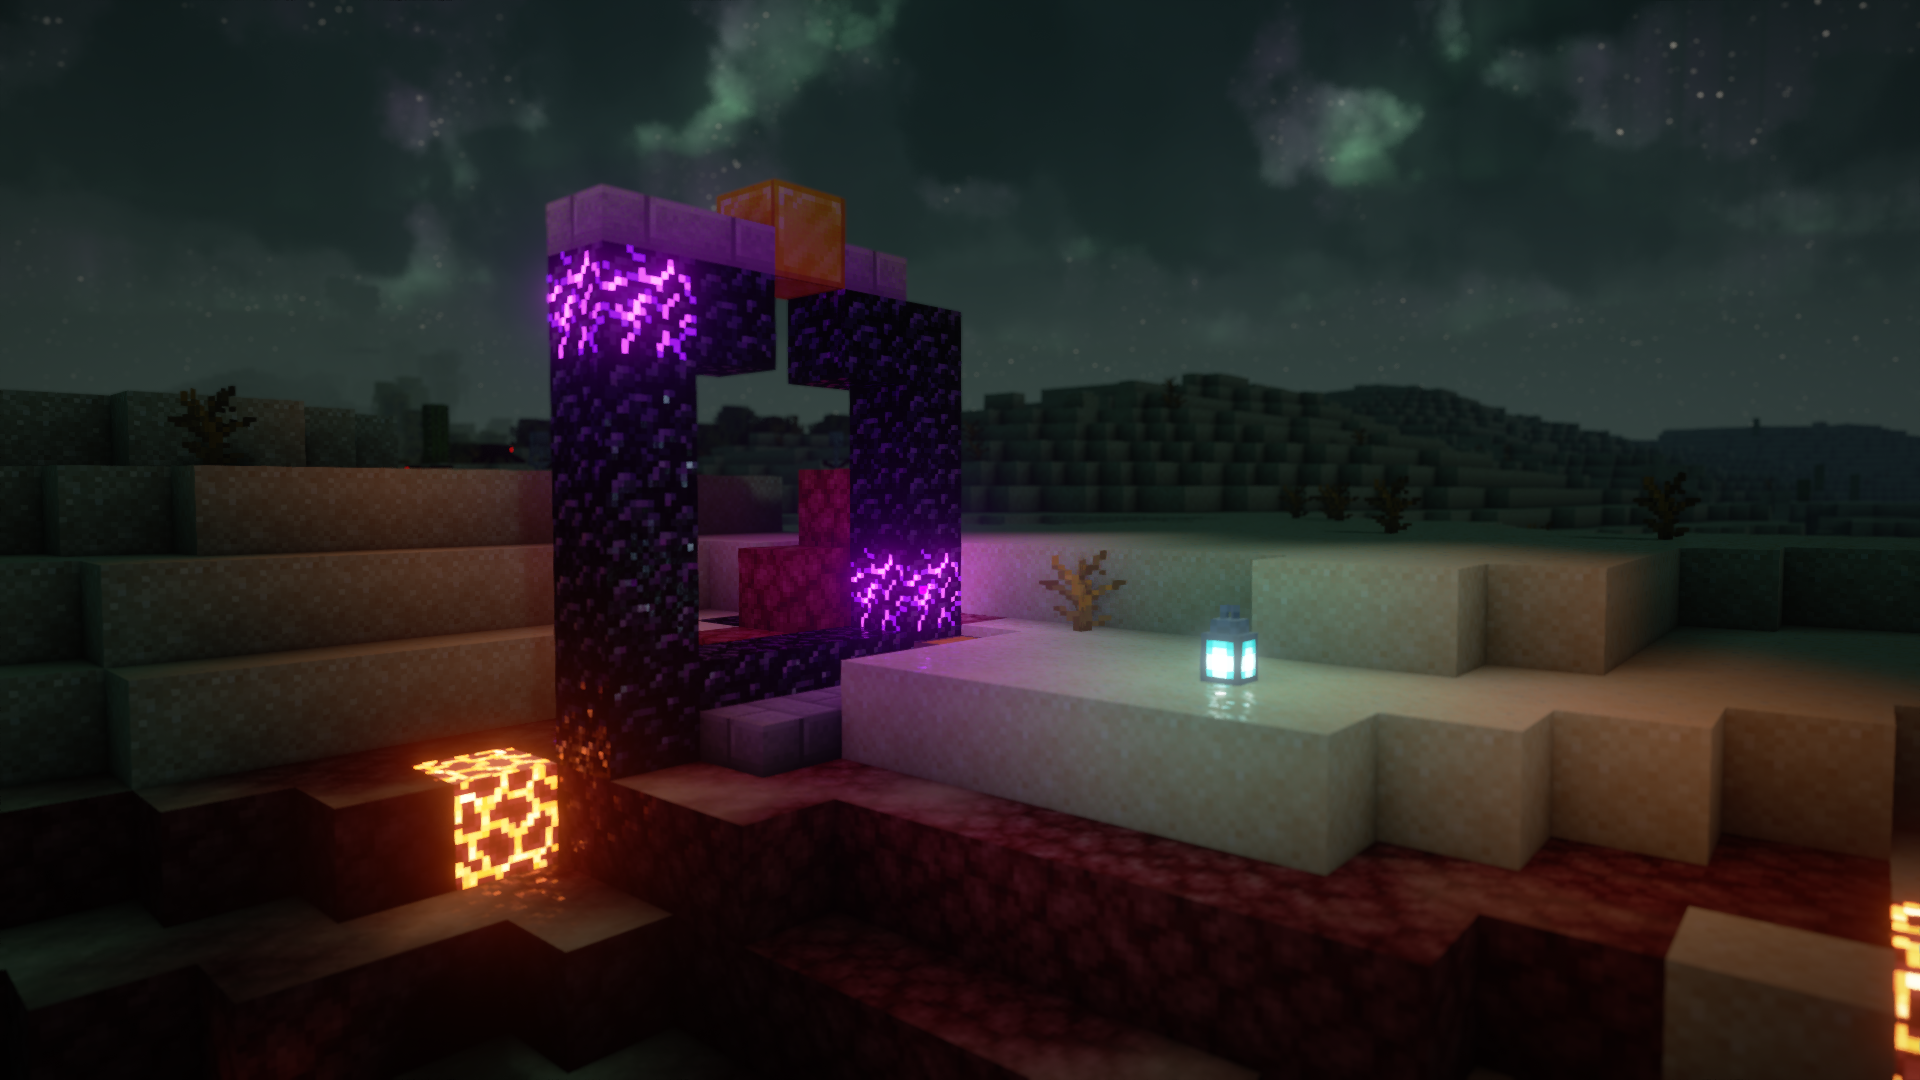 Colored blocklight with the Multi-Colored Blocklight option (screenshot by Chareflex77)